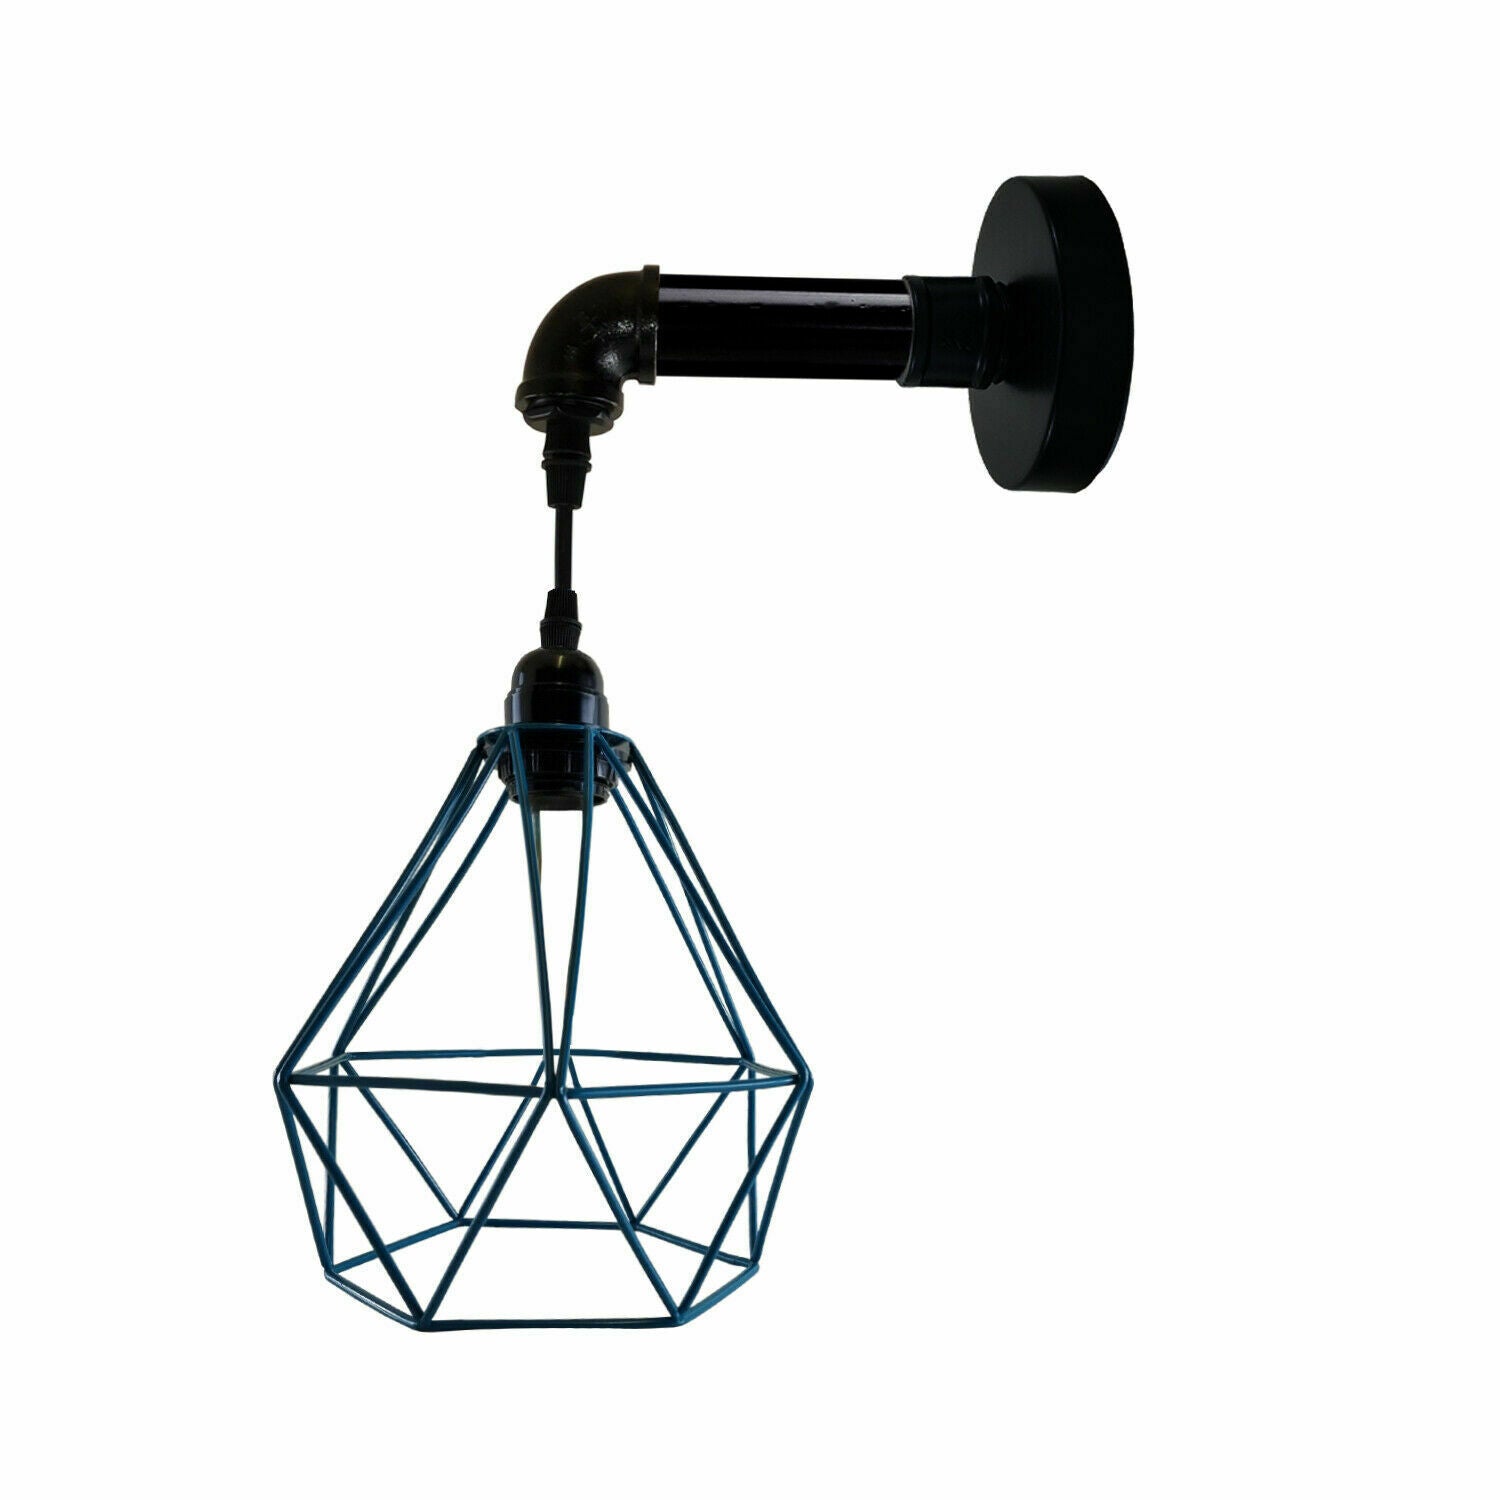 Modern Vintage Style Diamond Cage Wall Sconce Retro Pipe Lamp